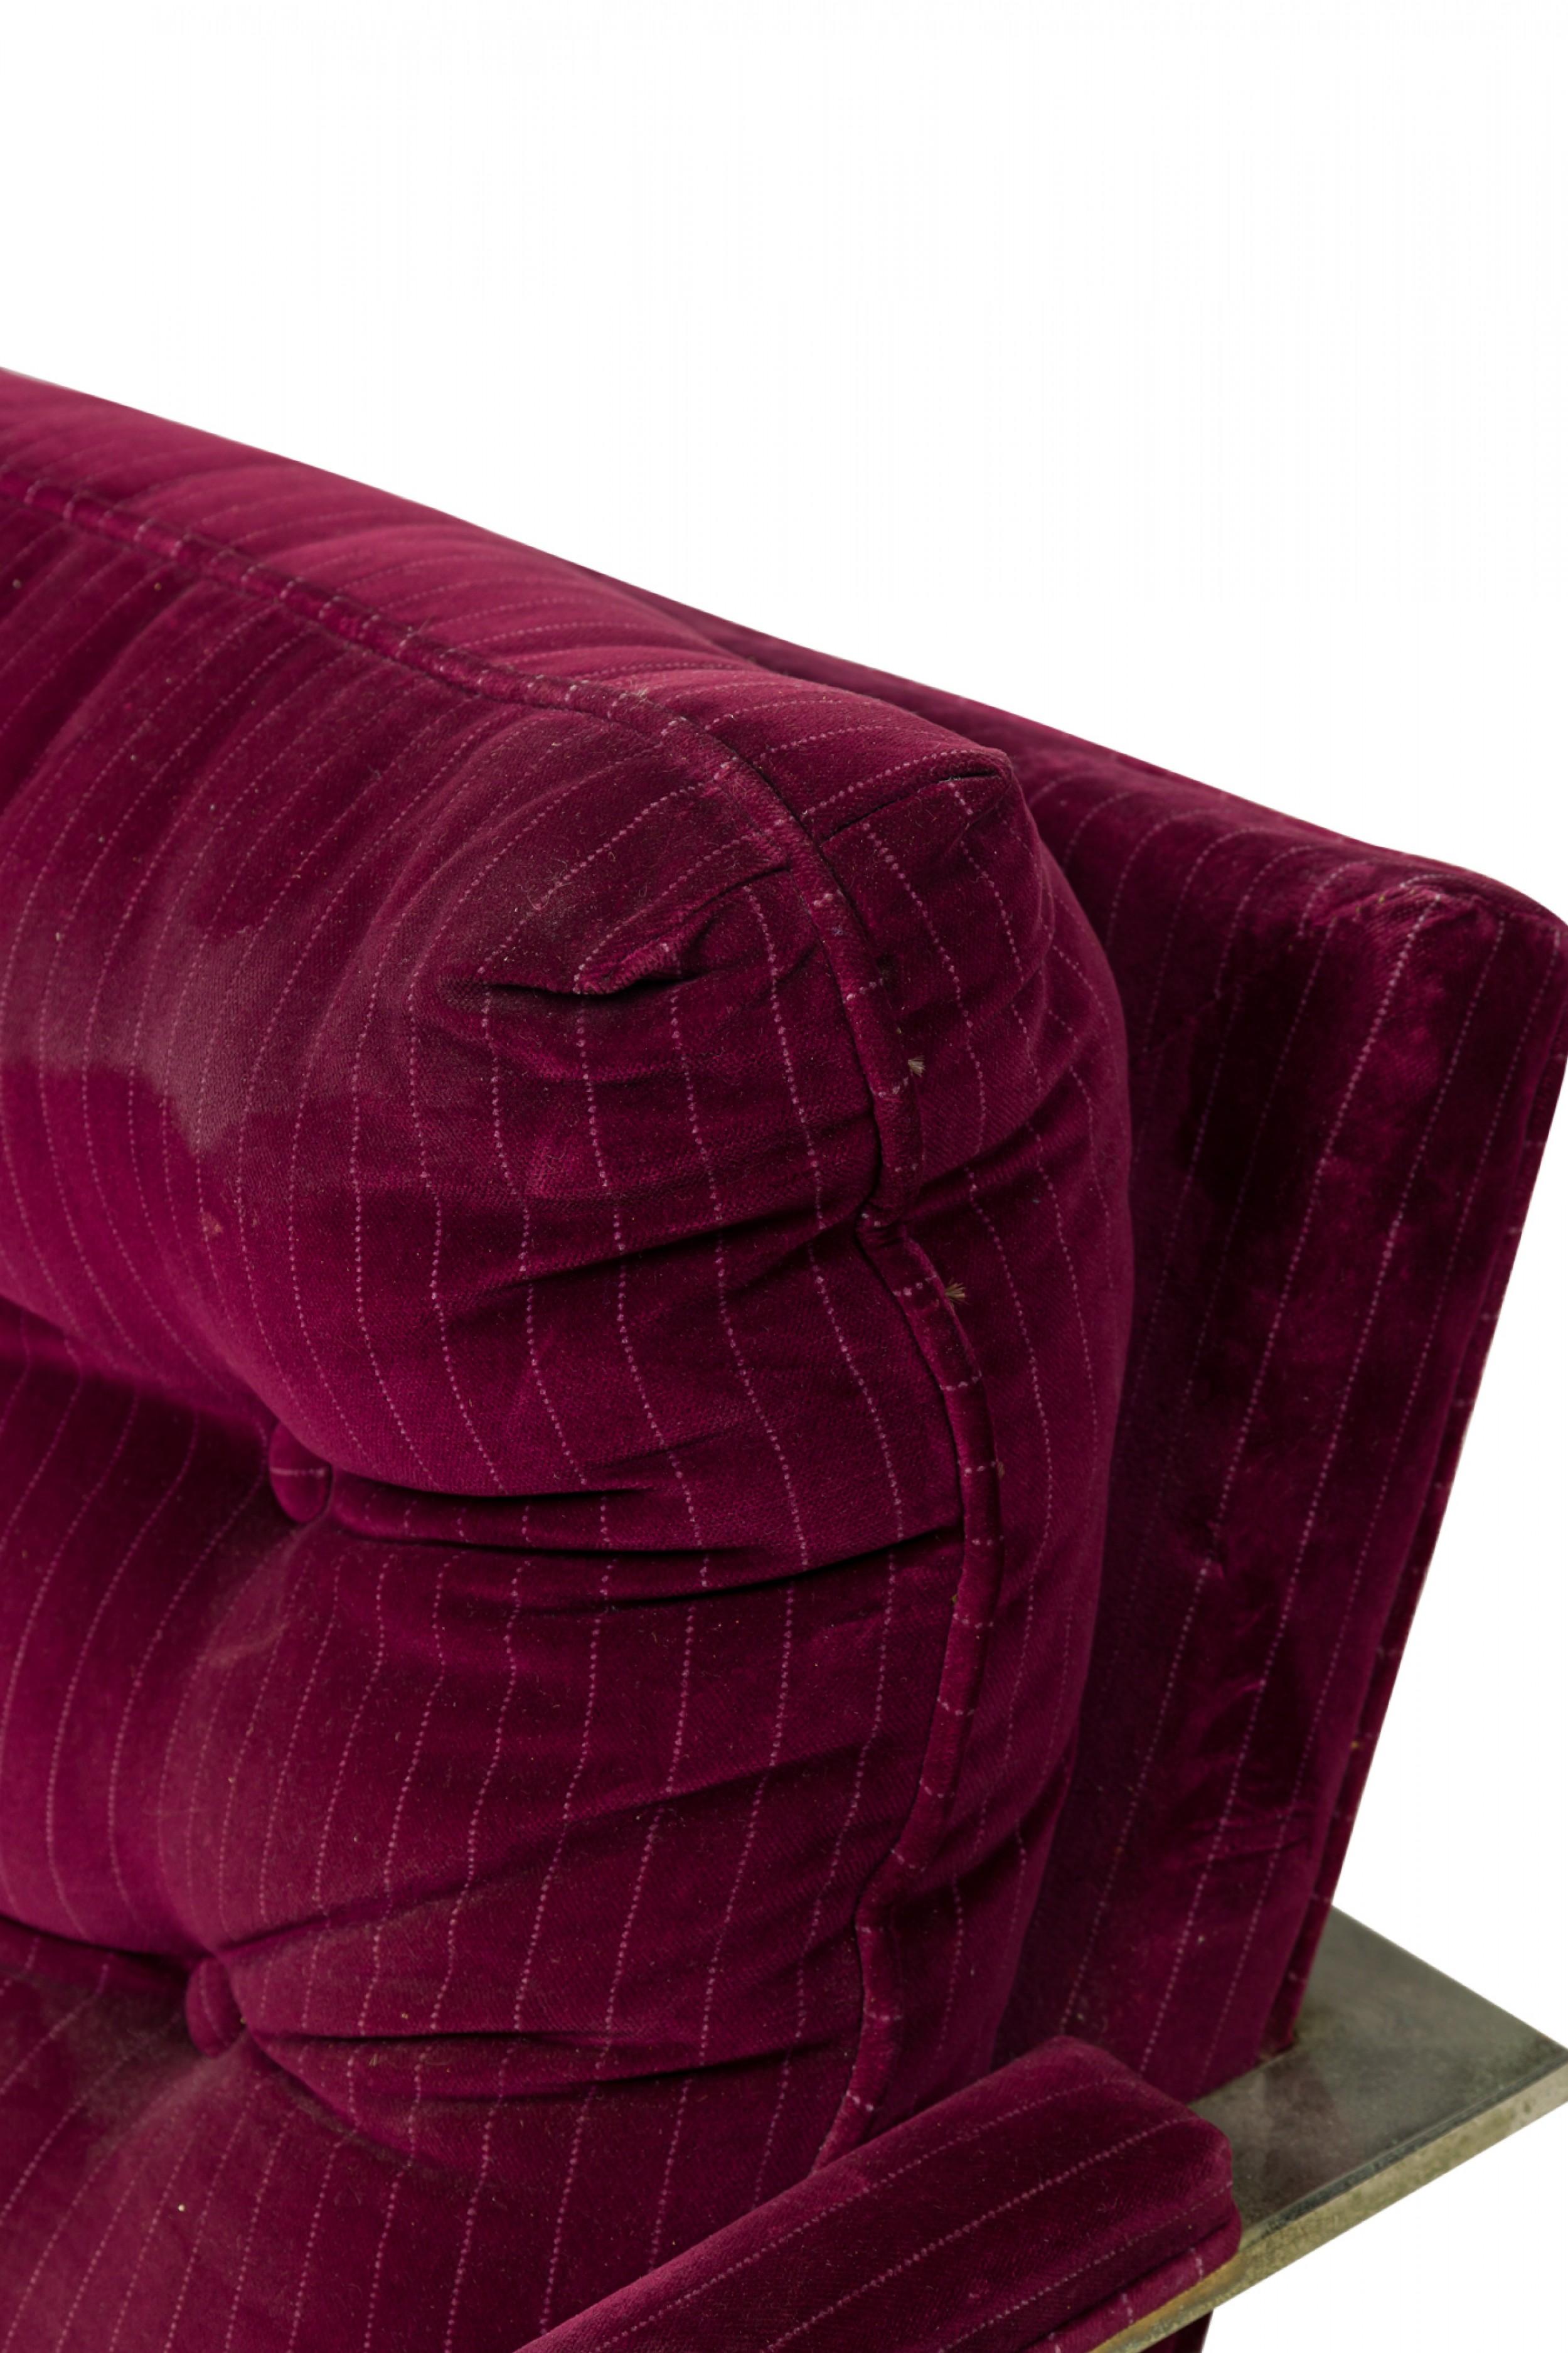 American Mid-Century lounge armchair with a polished chrome flat bar frame, upholstered in a pinstriped raspberry purple velour fabric. (MILO BAUGHMAN)(Similar chair in beige / taupe upholstery: REG5102A)
 

 Wear to upholstery, tarnishing to frame.
